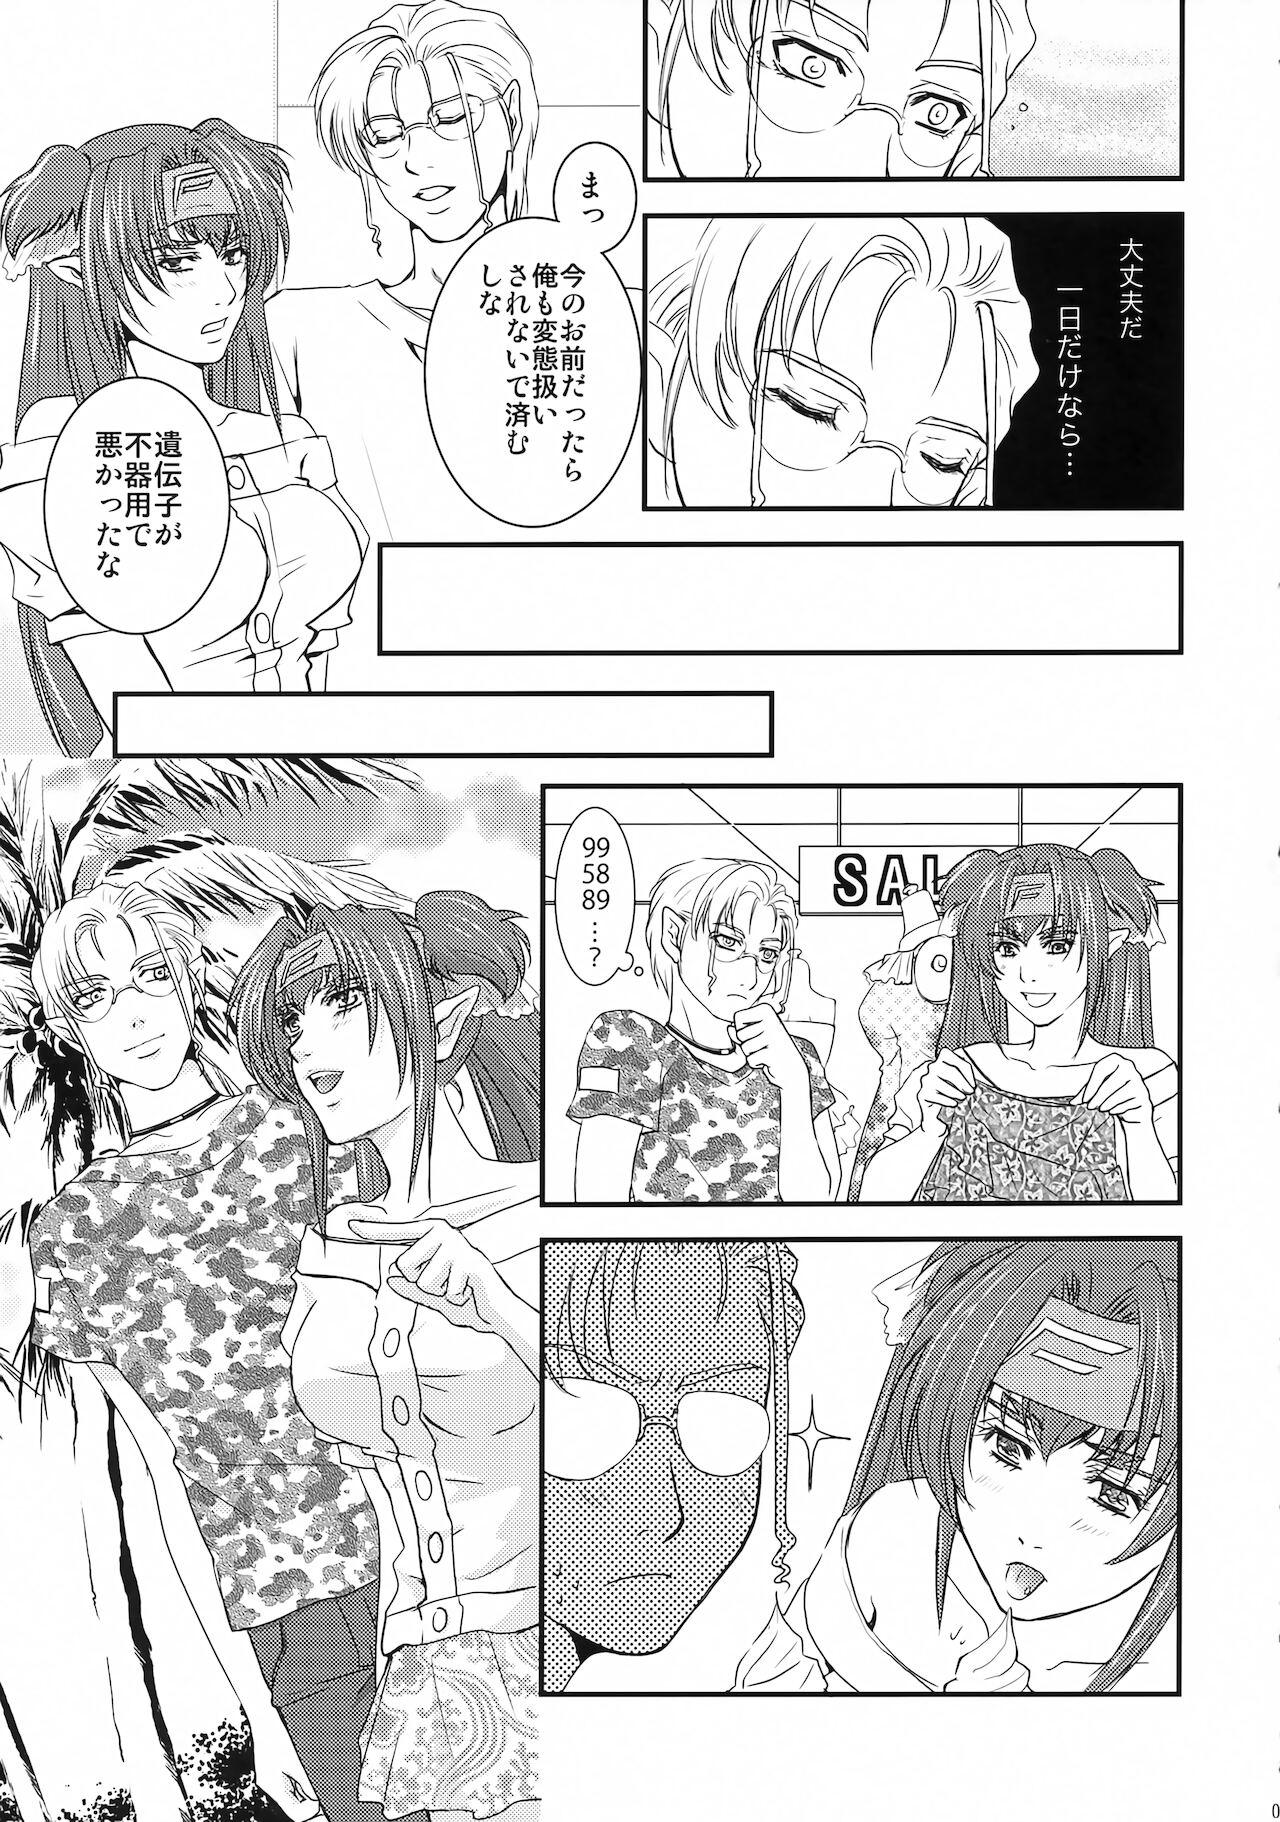 Gagging Synthetic - Macross frontier Belly - Page 9